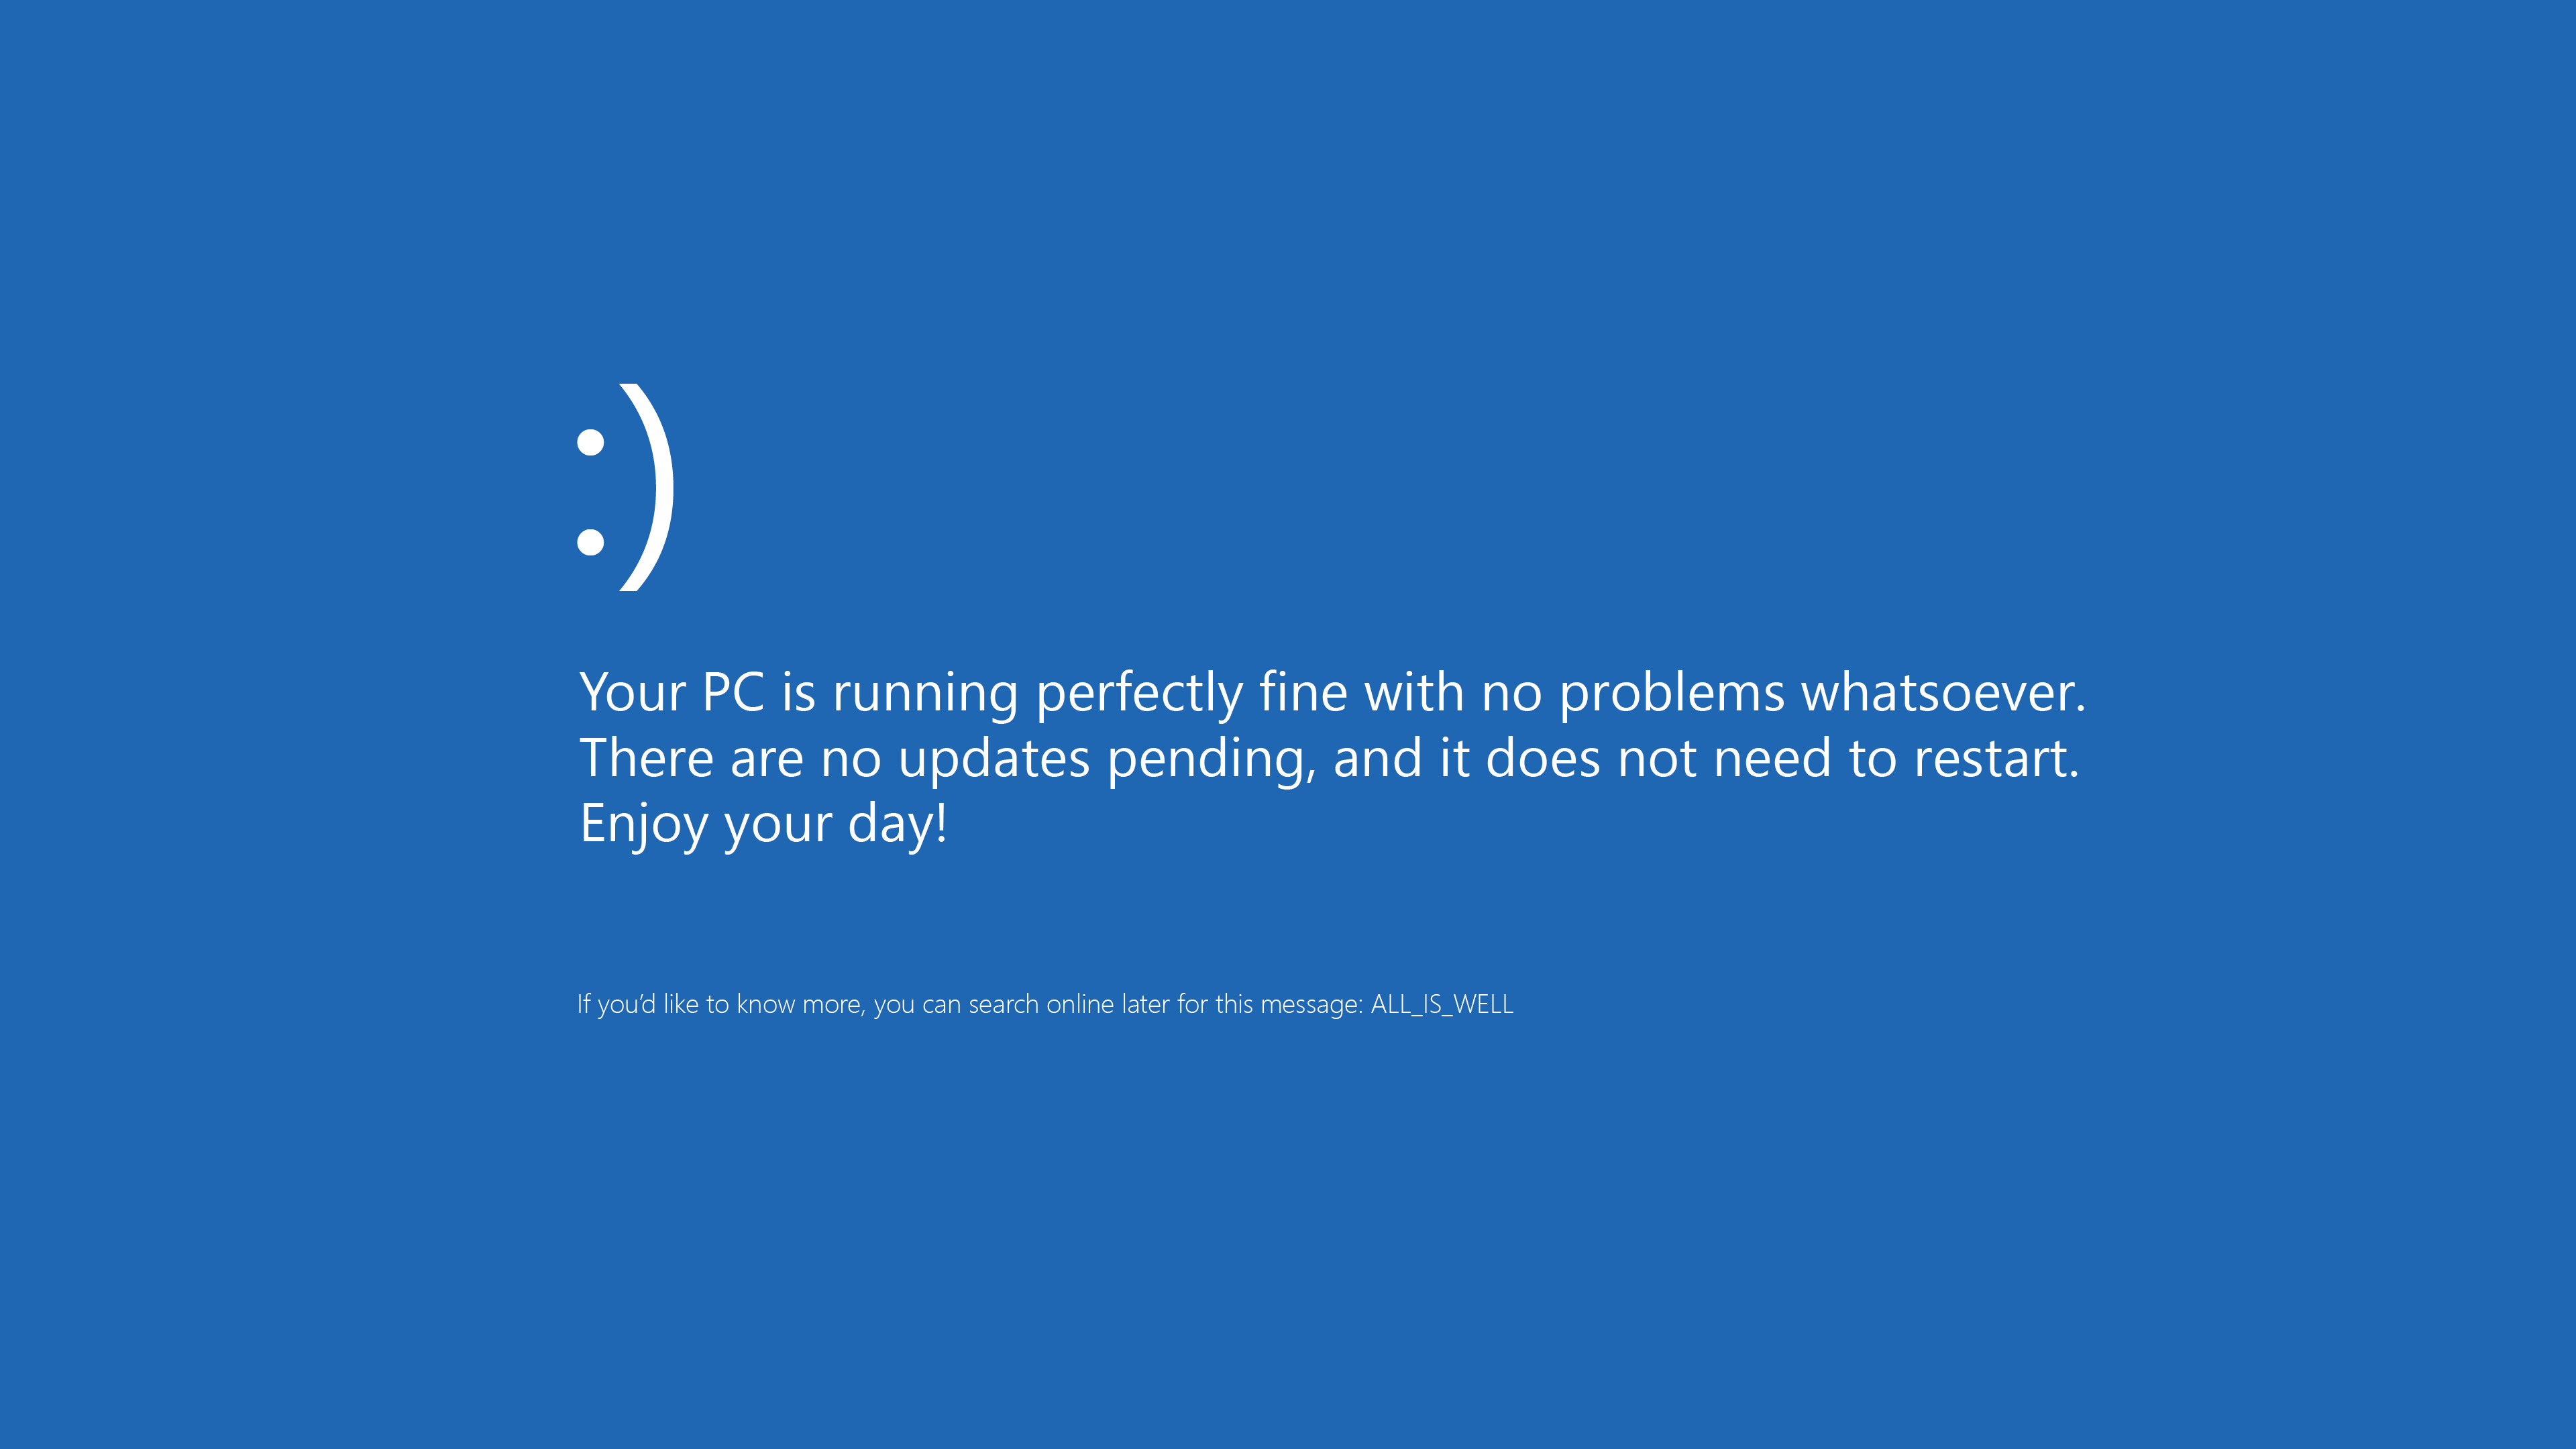 Windows 10, Blue Screen of Death, warning signs, blue, Microsoft, text ...